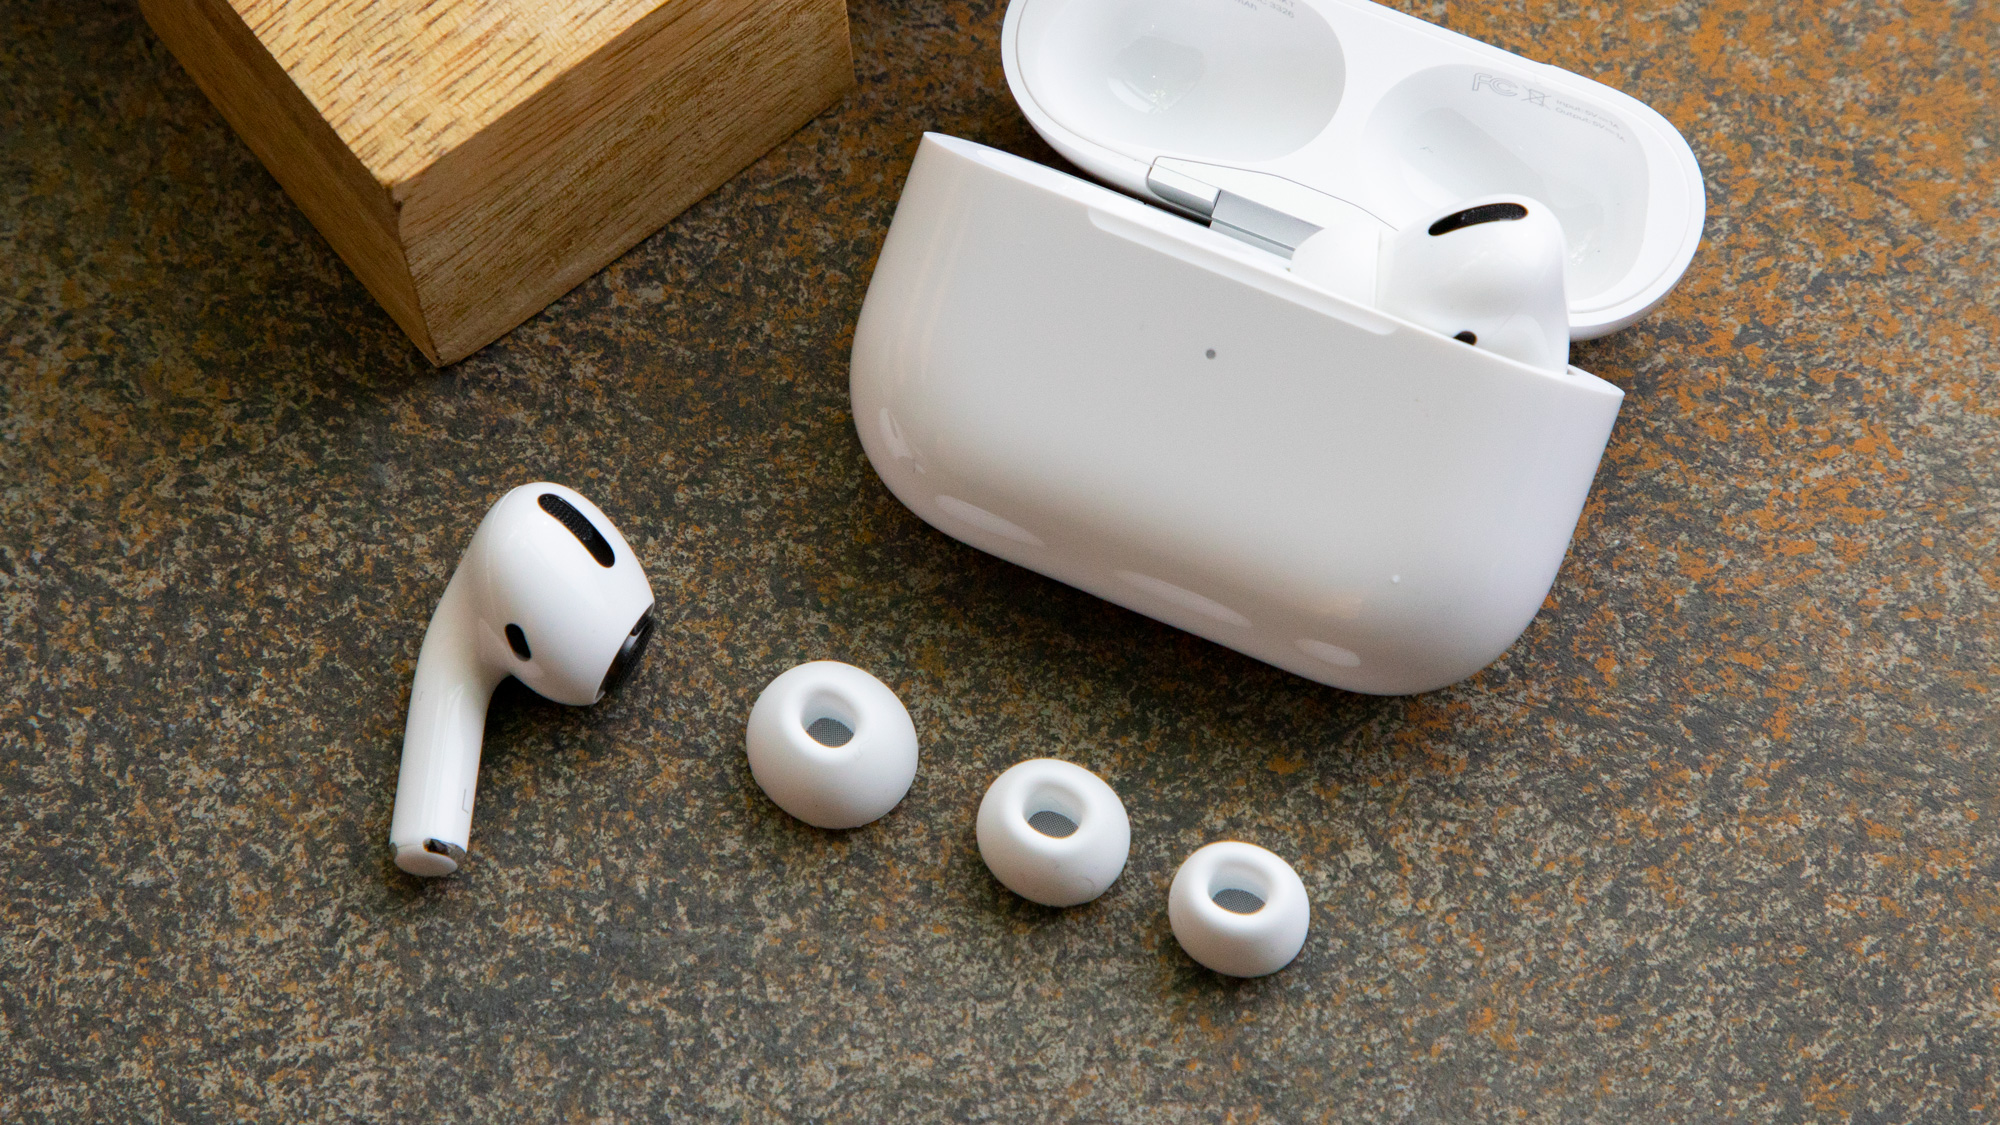 Hanging in there: AirPods Pro remain at their lowest price yet